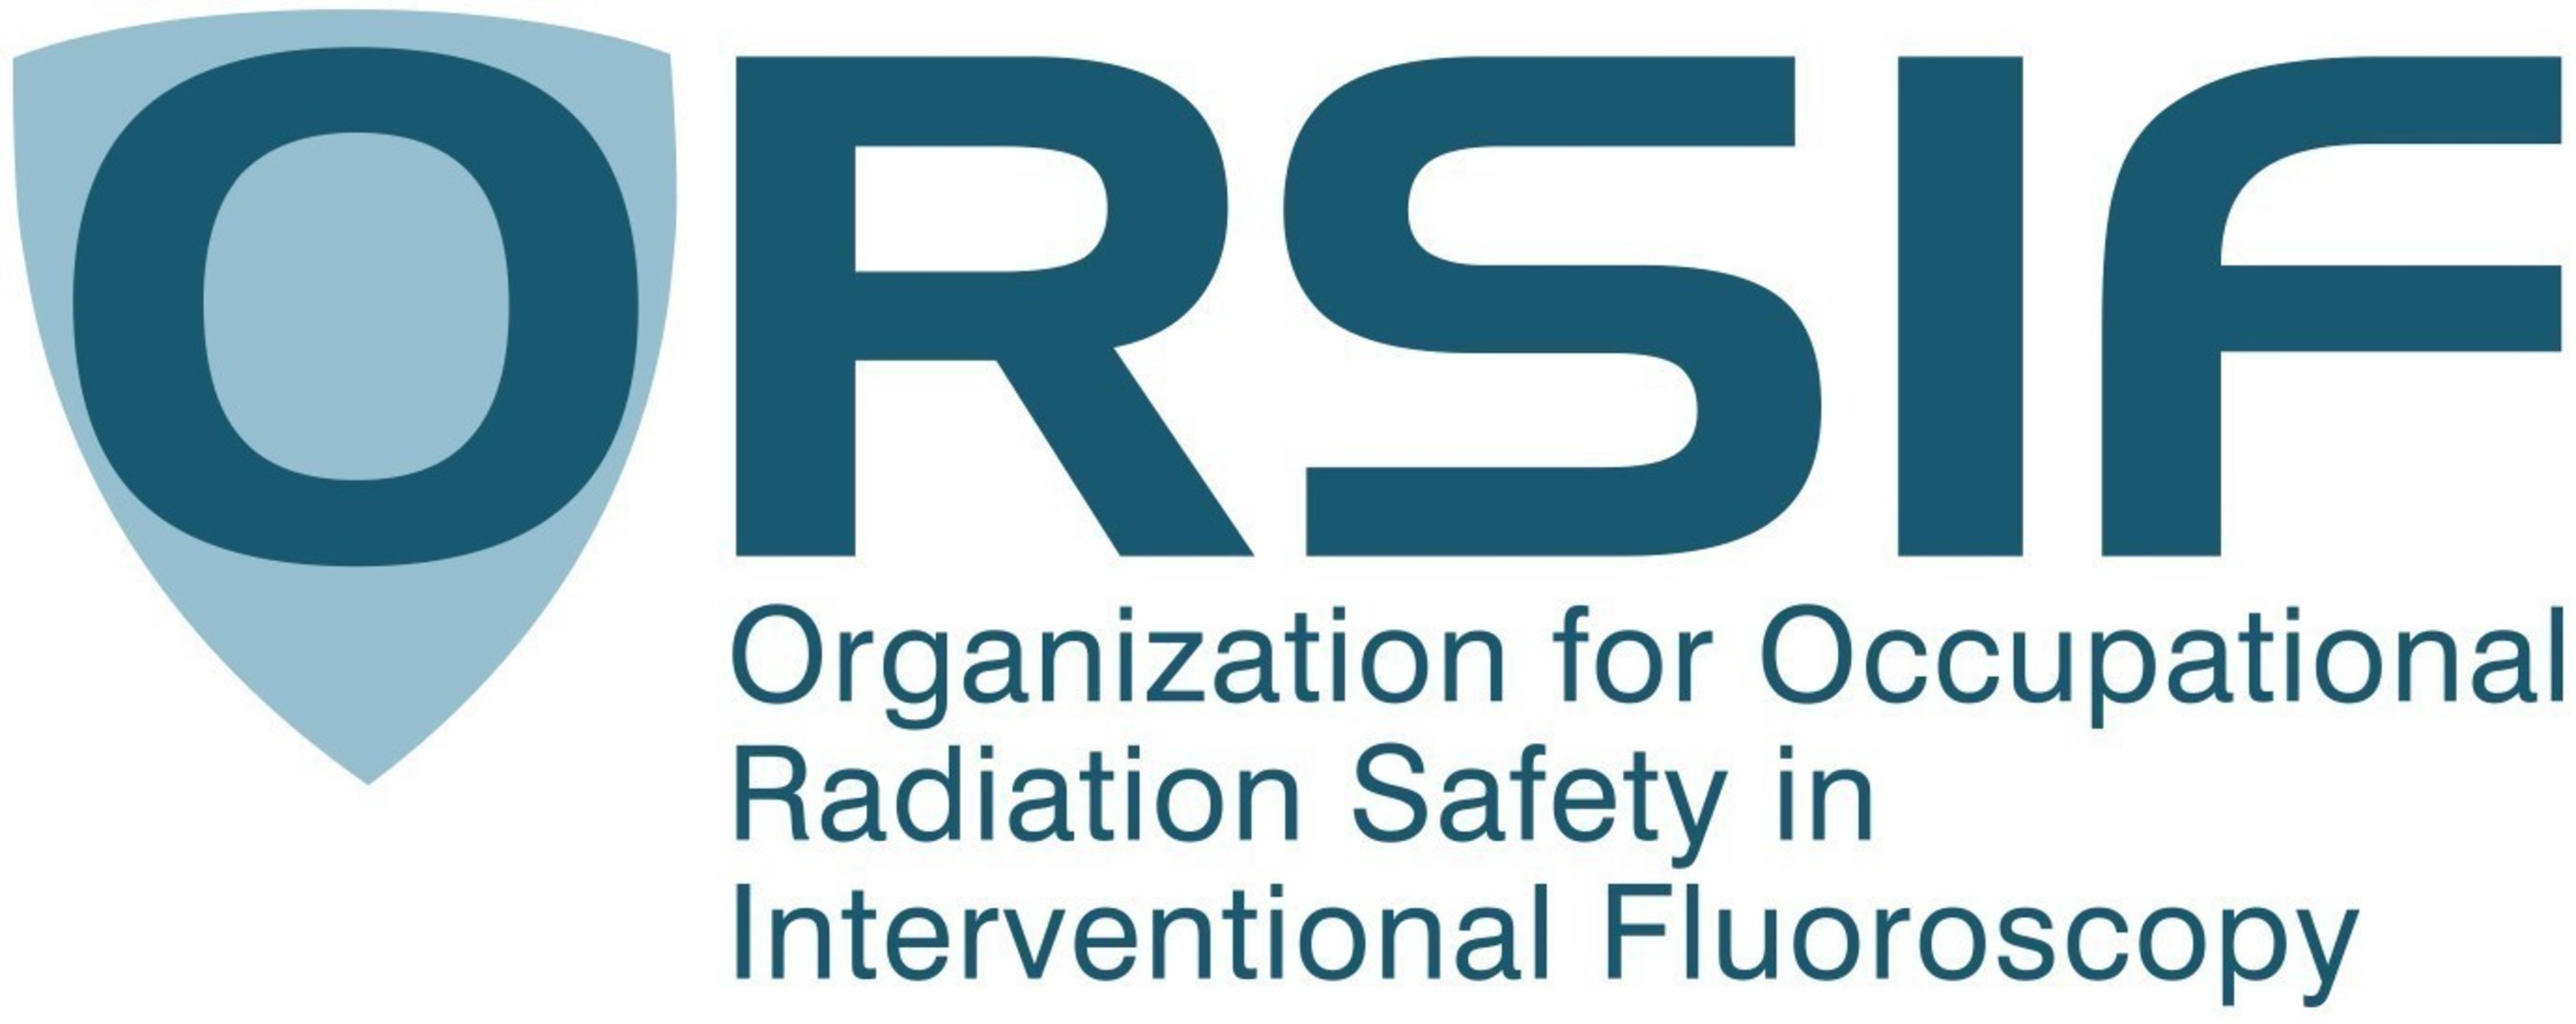 Organization for Occupational Radiation Safety in Interventional Fluoroscopy (ORSIF)